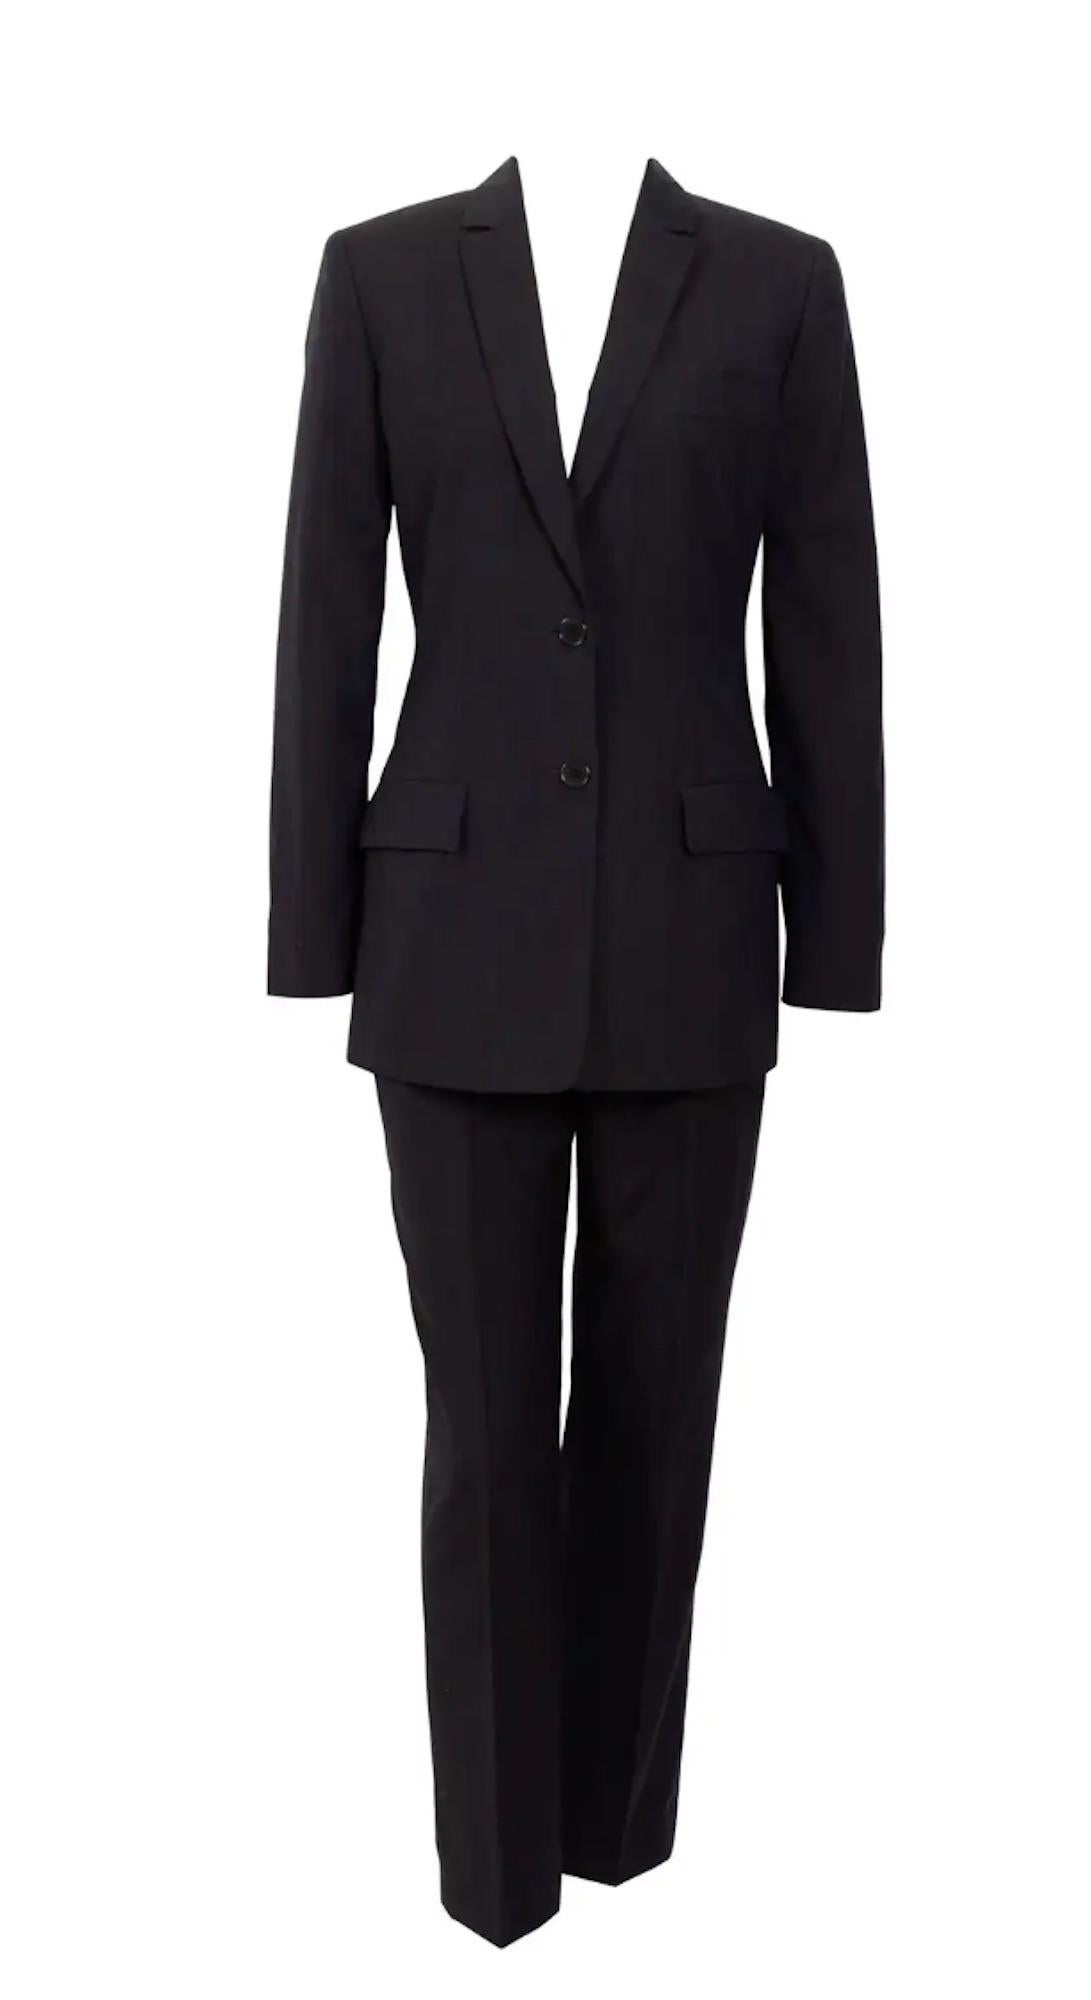 Calvin Klein collection by Calvin Klein vintage 1990's tailored pin stripe suit For Sale 8